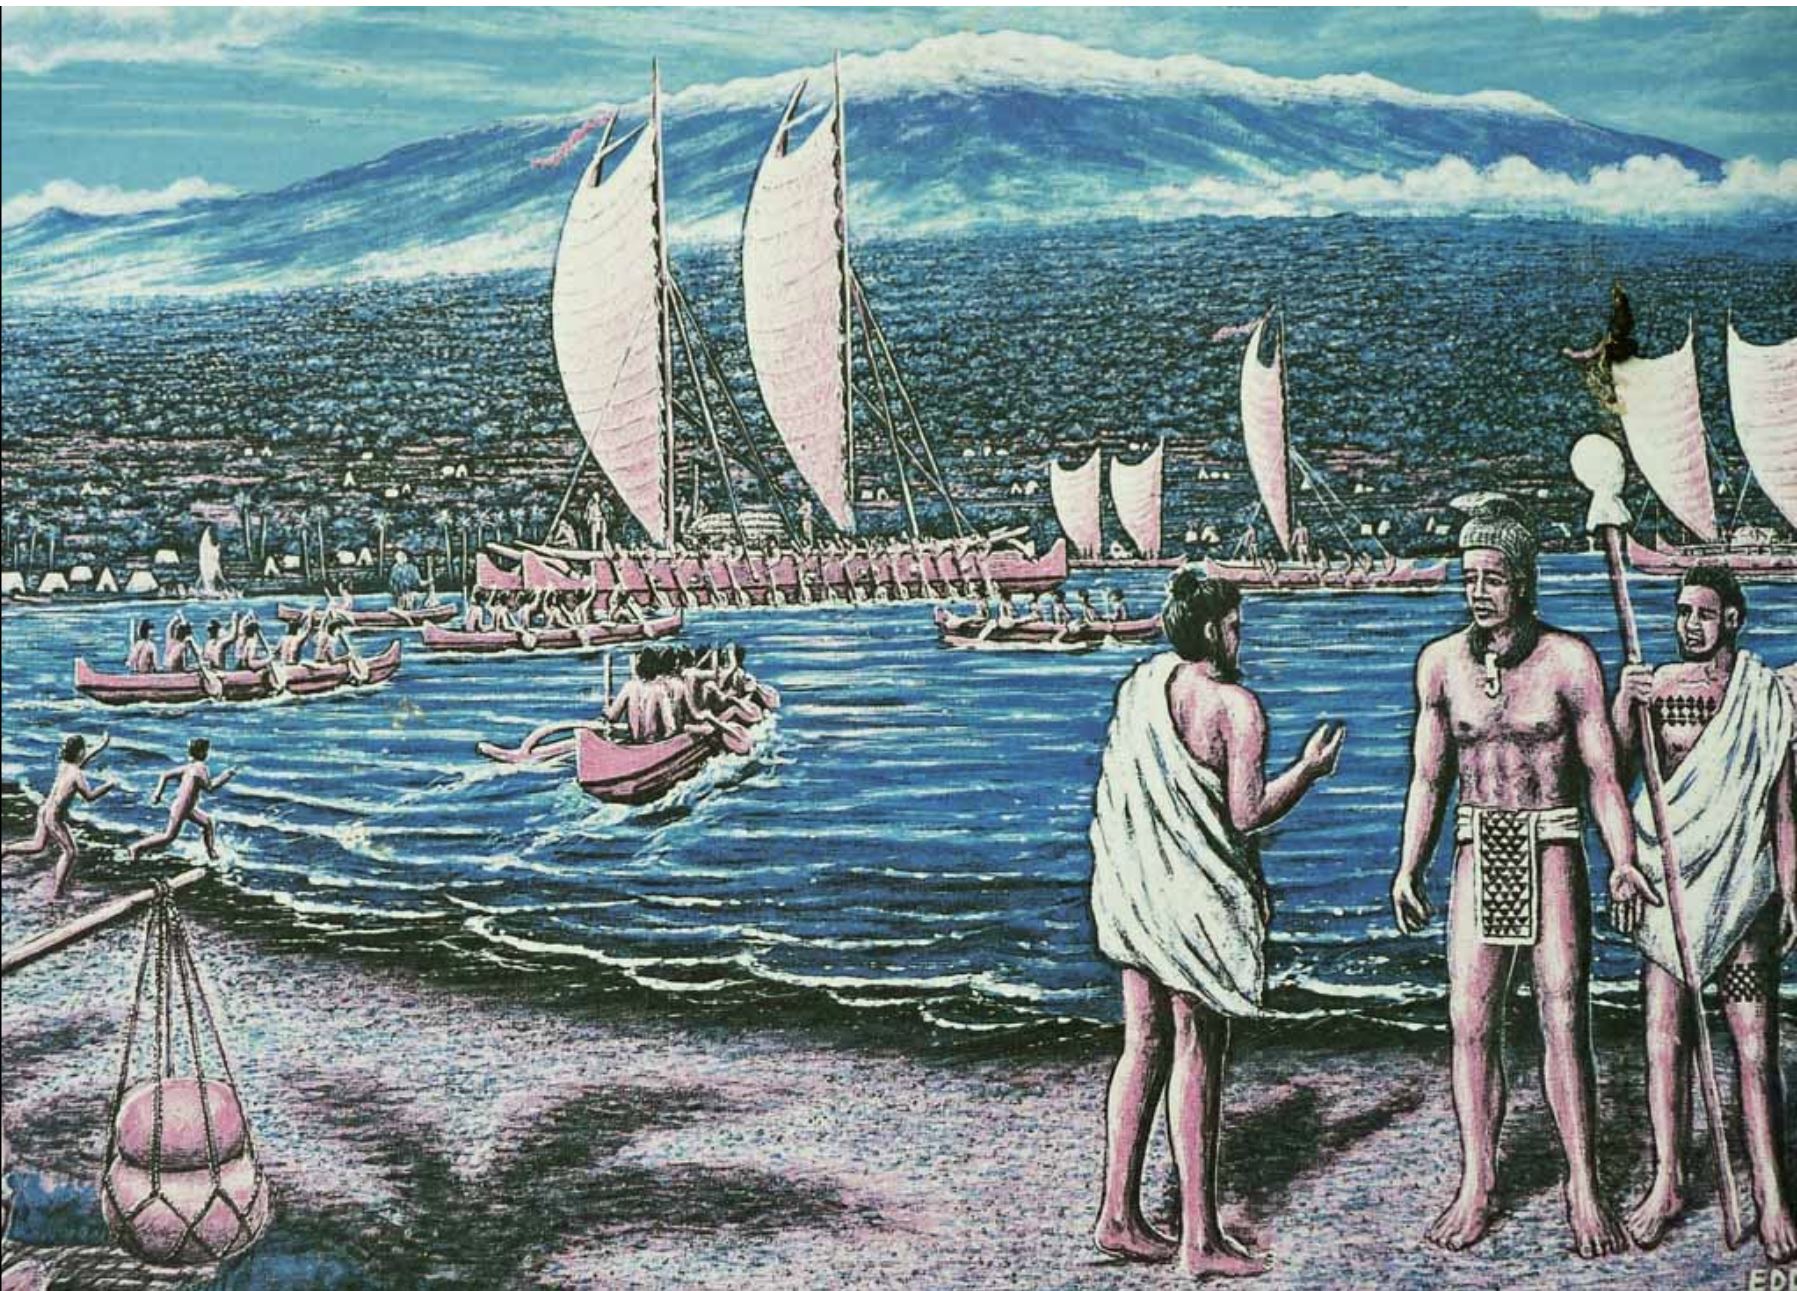 Painting depicting the murder of King Kiwala'o who was Kamehameha's cousin showing Kiwalao along the shoreline with the two priests sent to kill him and a fleet of Kamehameha's sailing canoes behind them